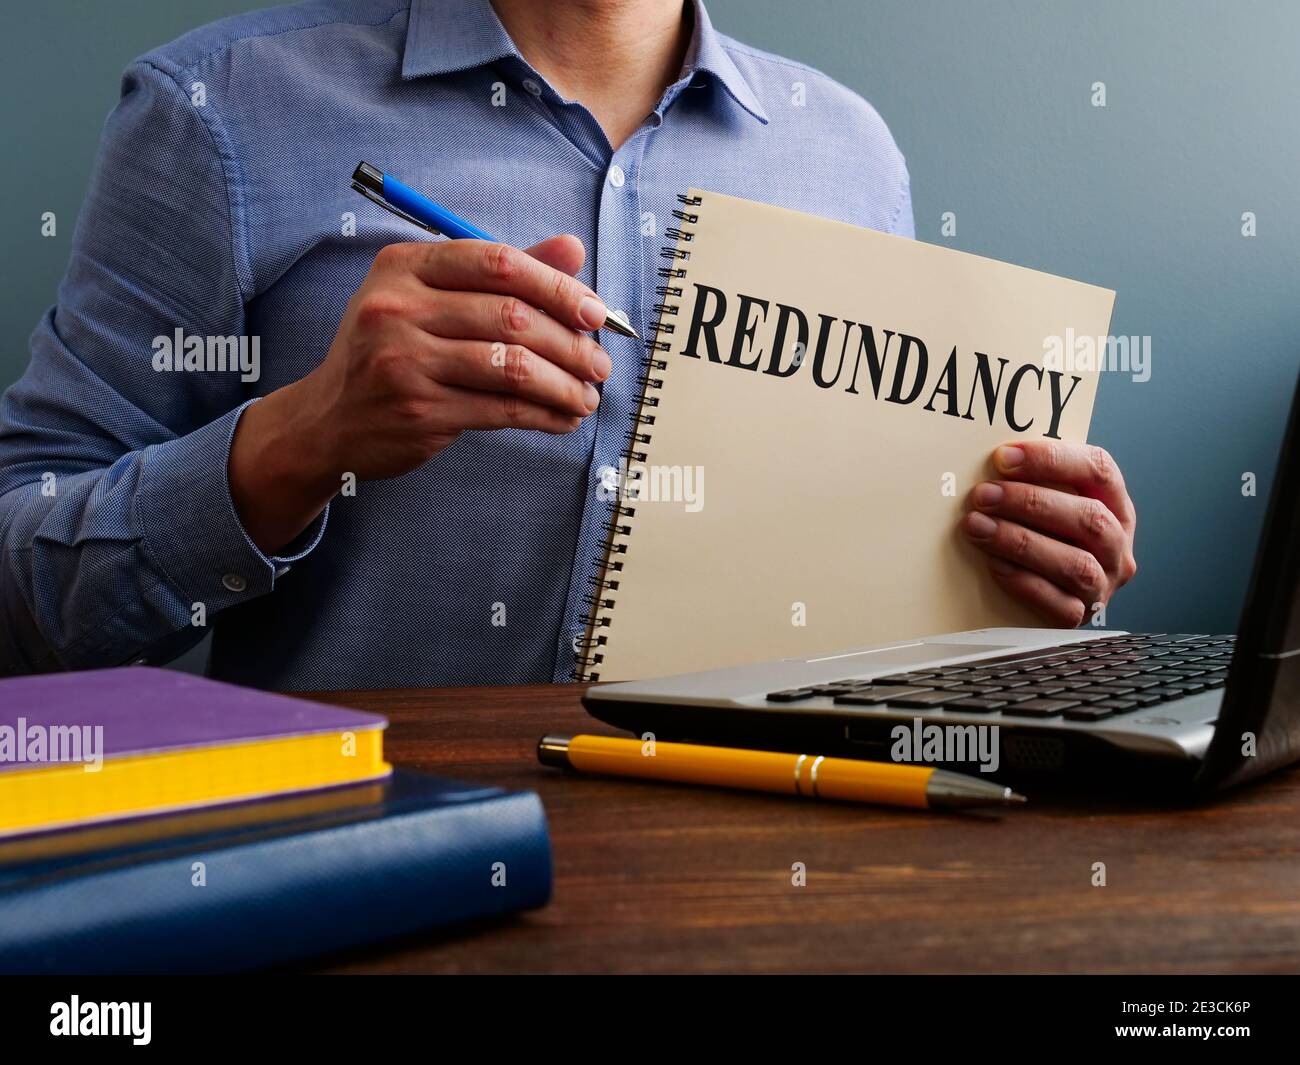 Redundancy concept. Man at the table holds papers. Stock Photo